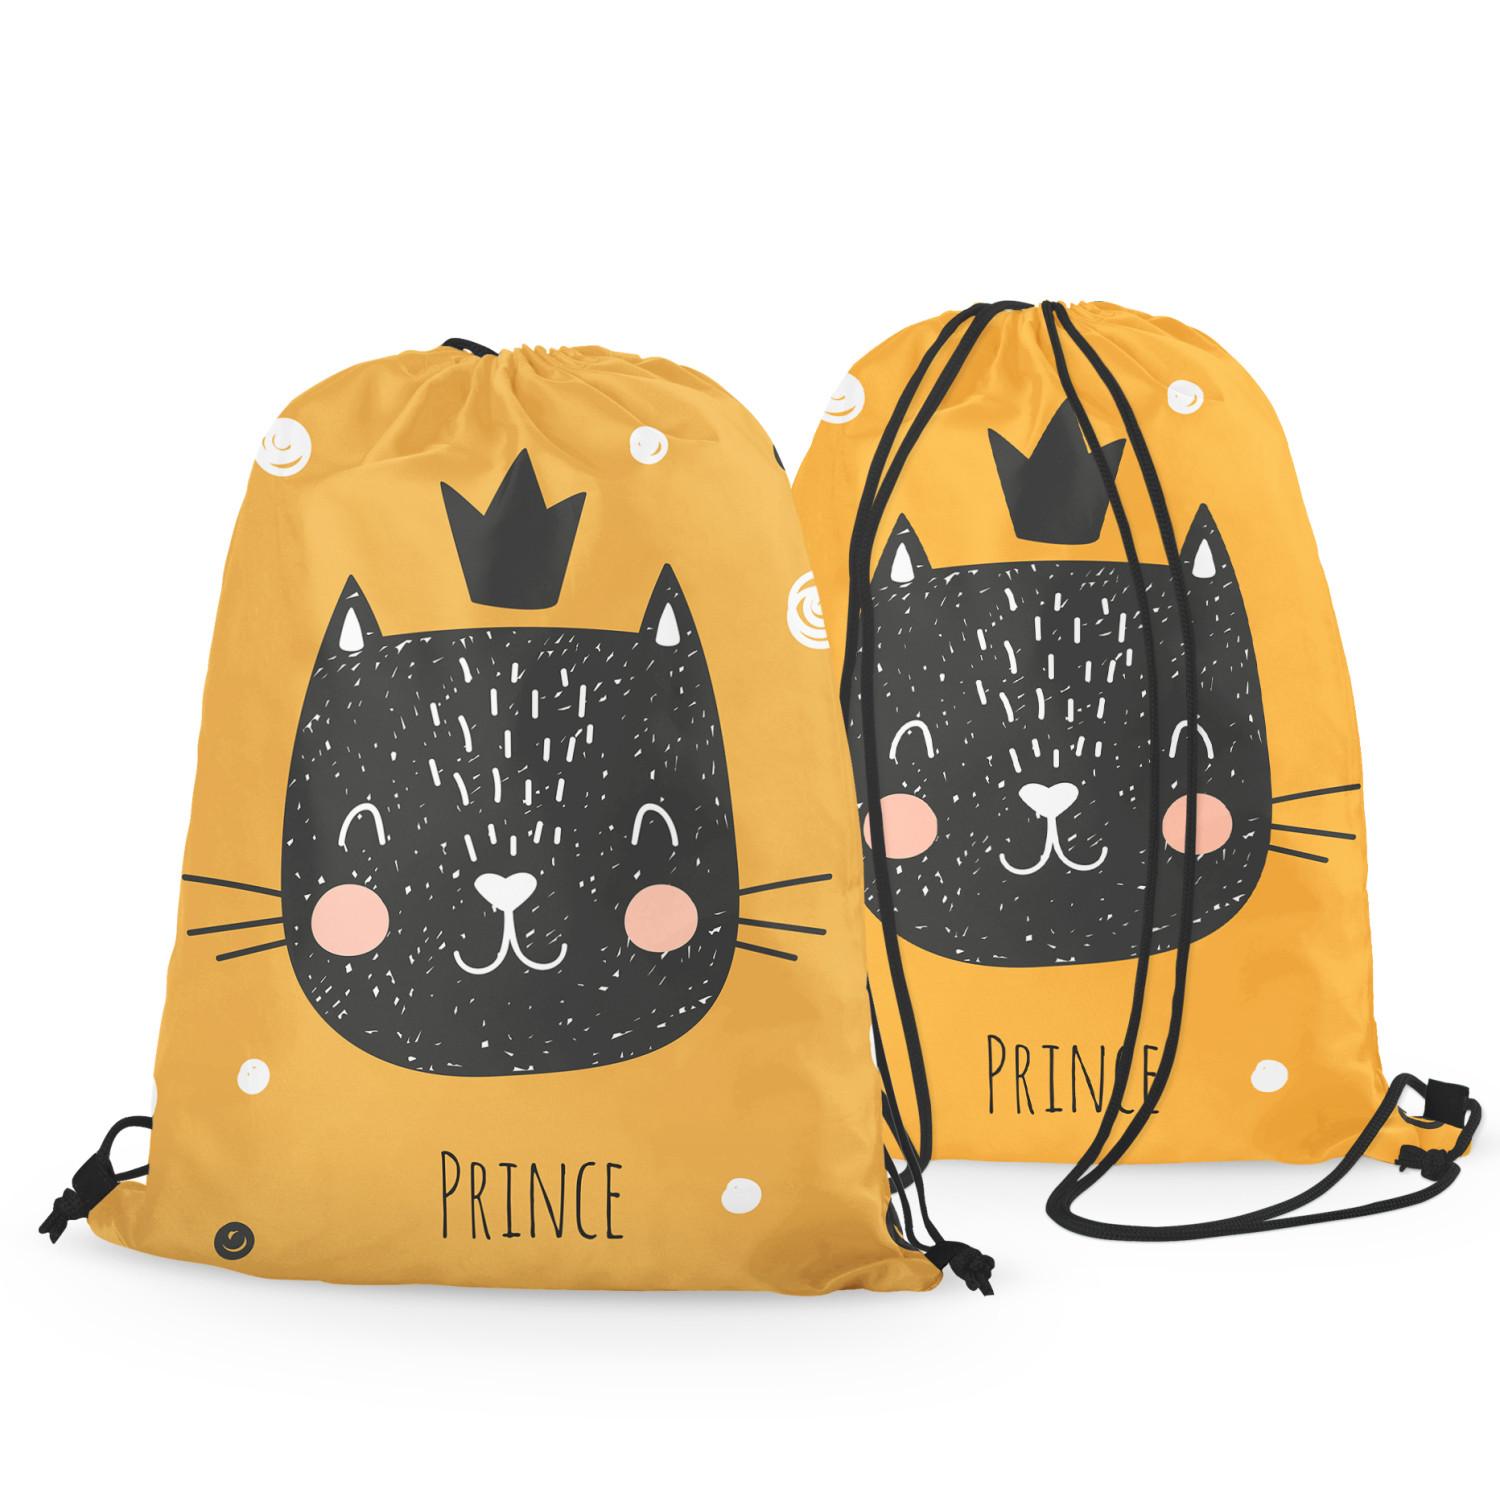 Backpack Cat prince - composition with elements in shades of white and black